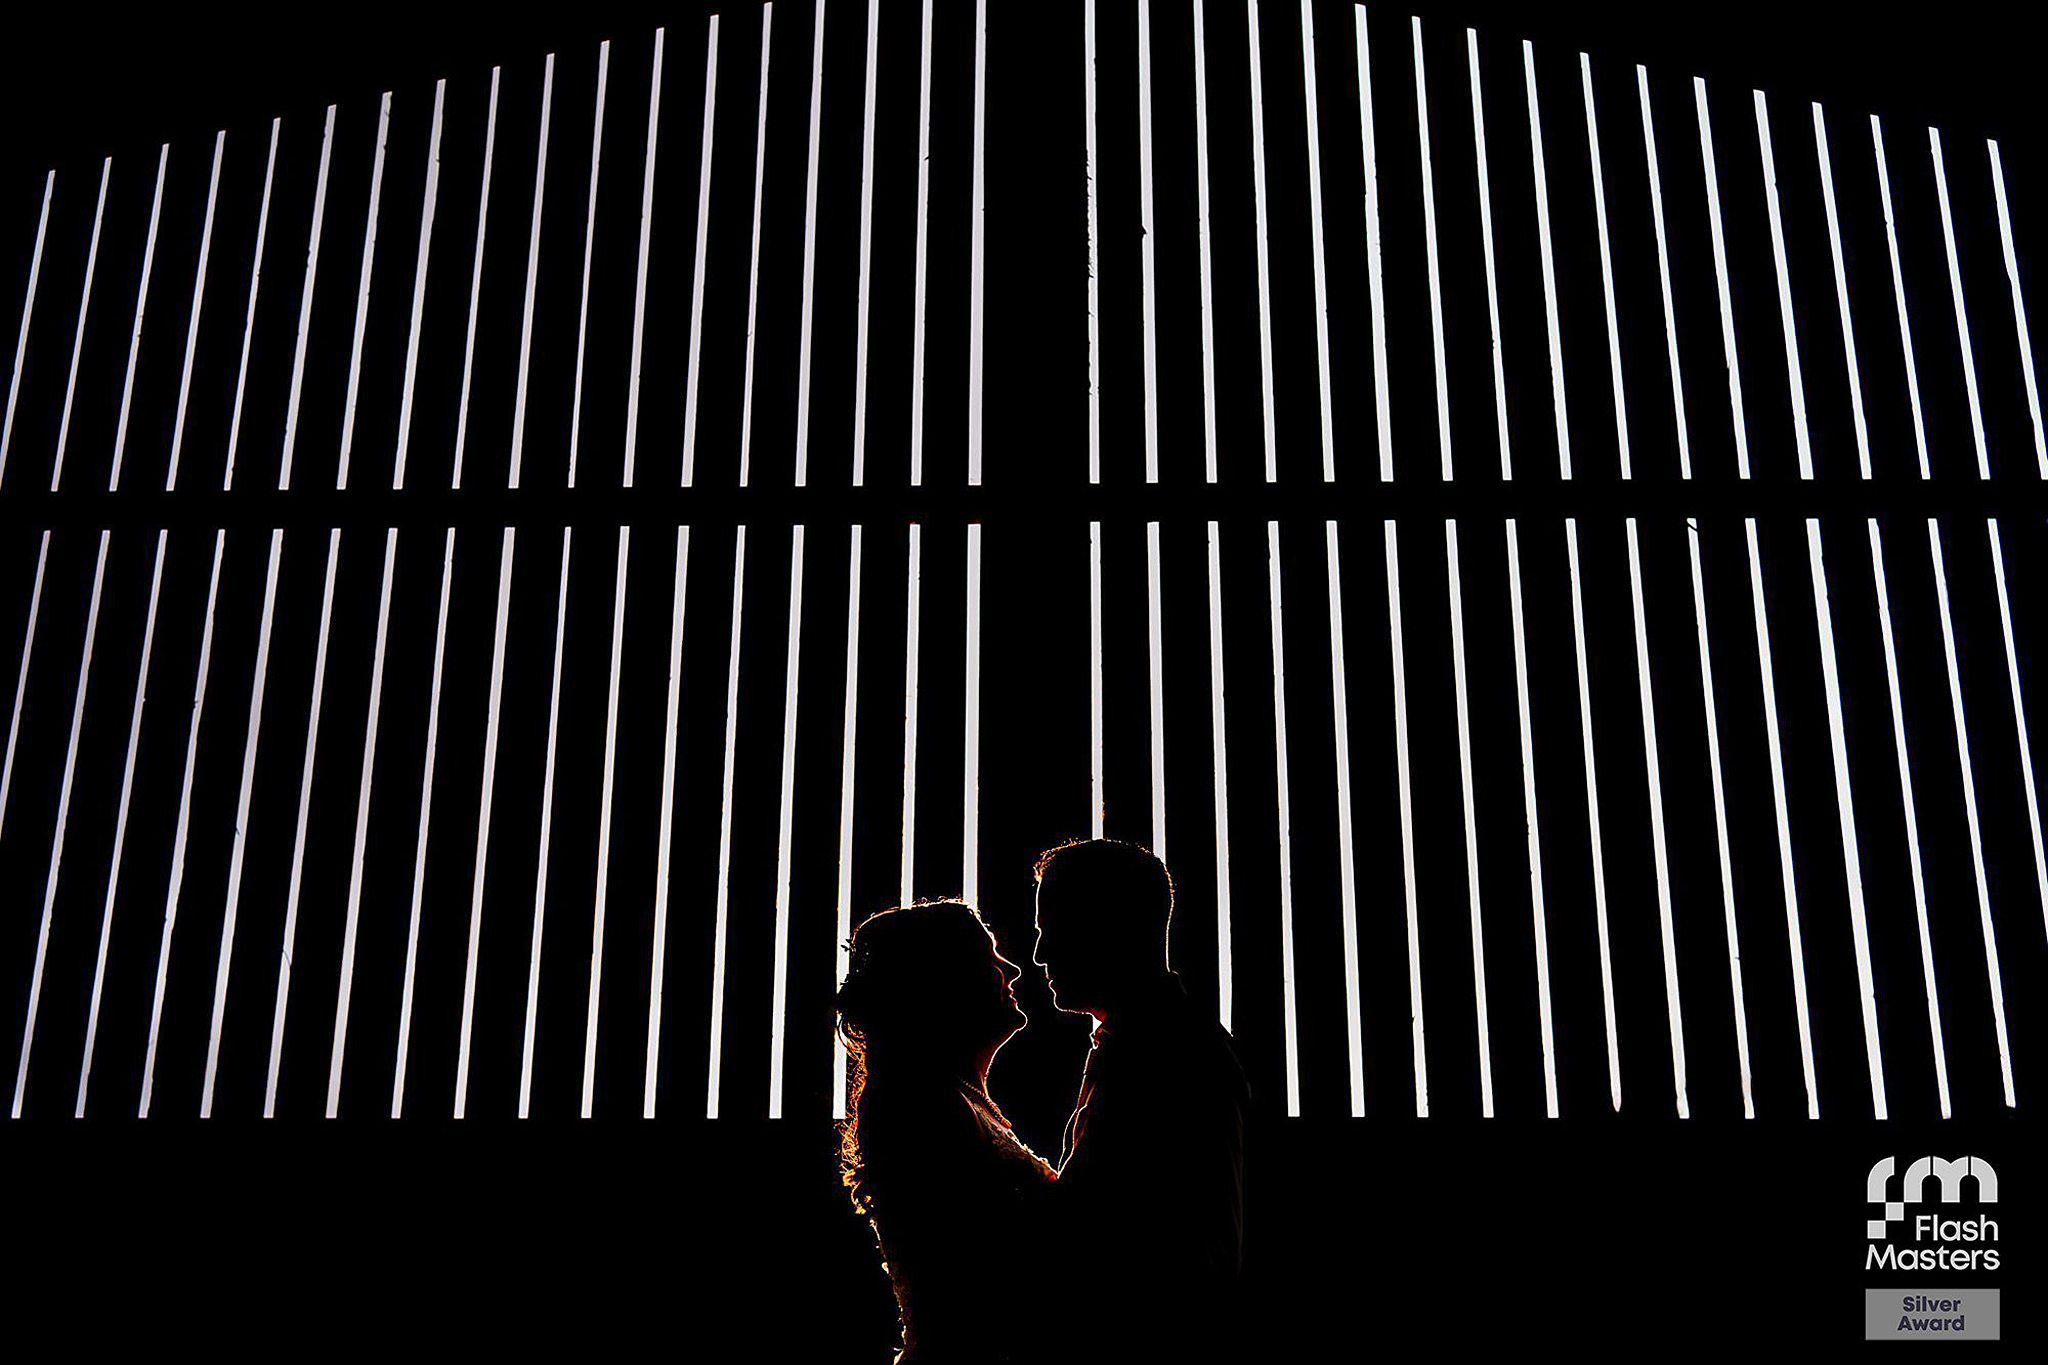 Silhouette of couple against illuminated vertical stripes.